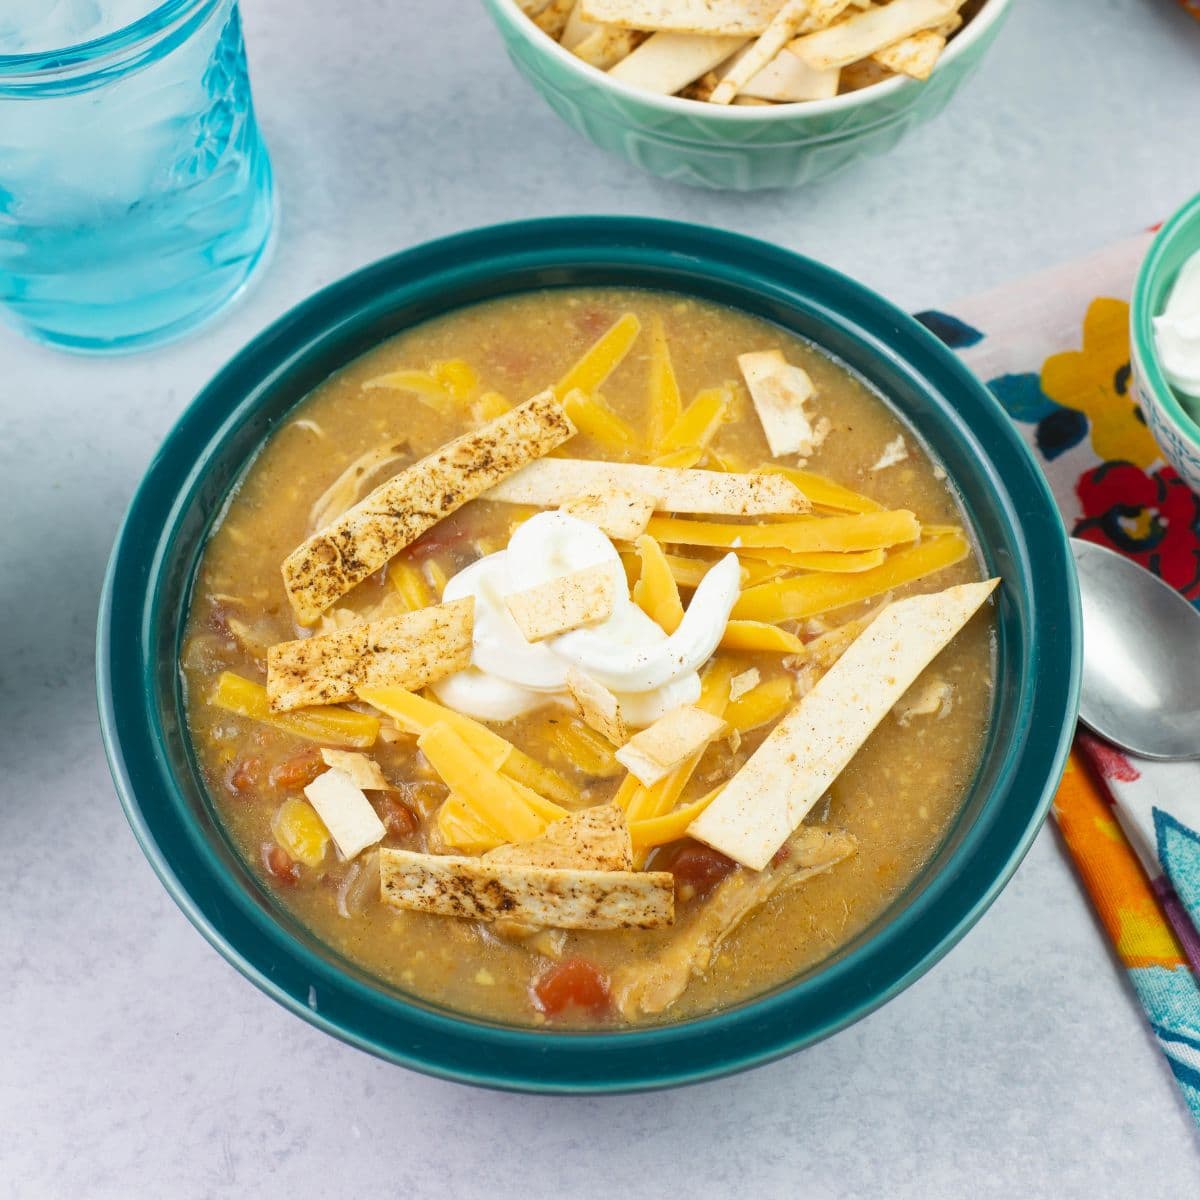 A bowl filled with Chicken Enchilada Soup garnished with sour cream, cheese and toasted tortilla chips.